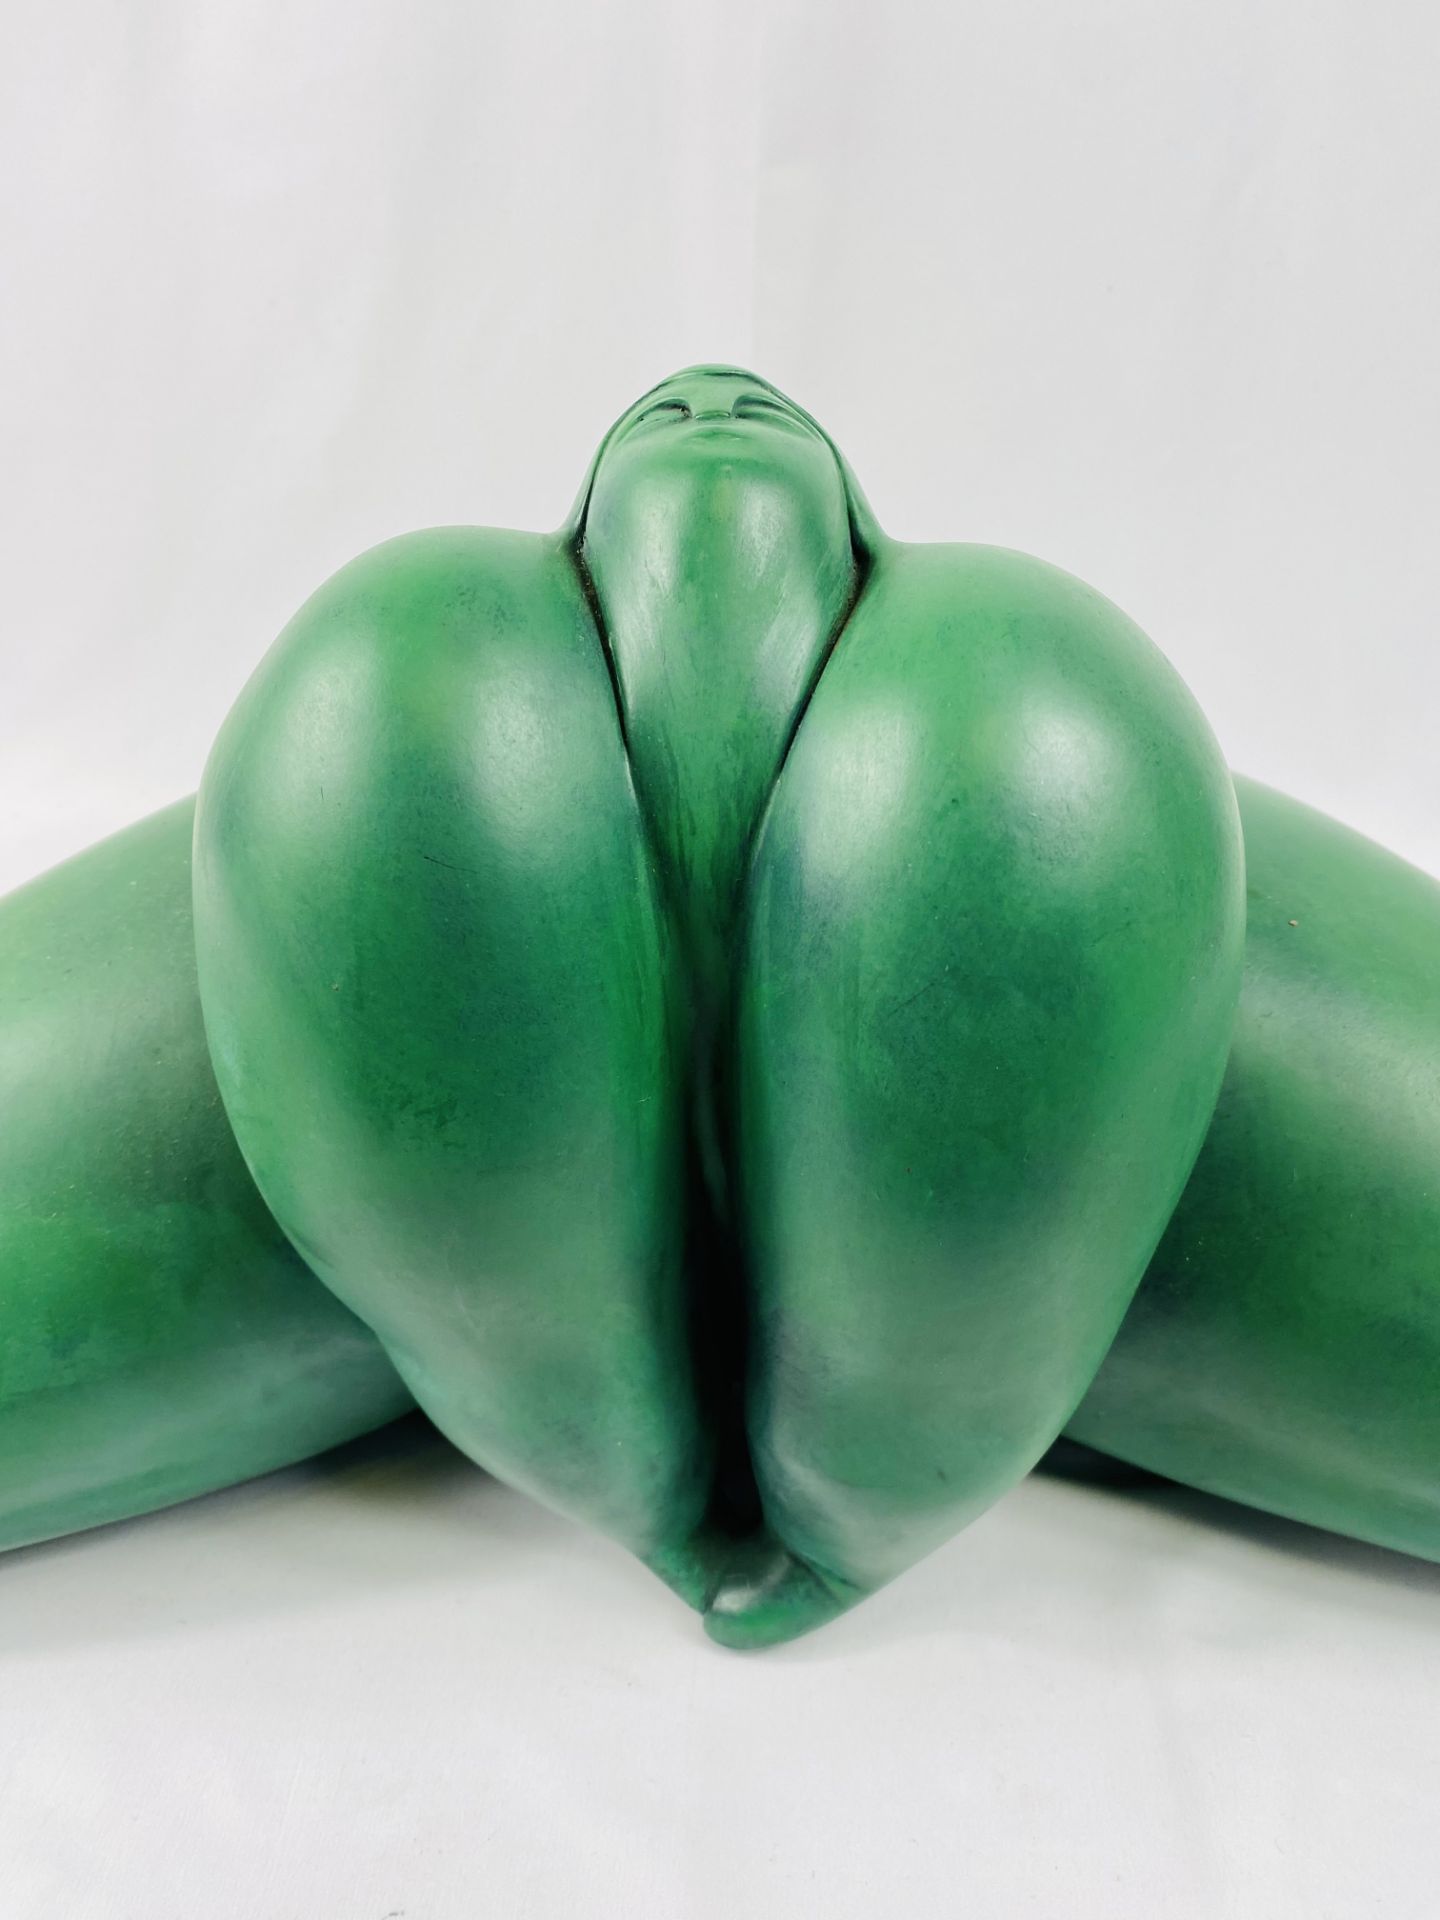 Green composite stone sculpture - Image 2 of 3